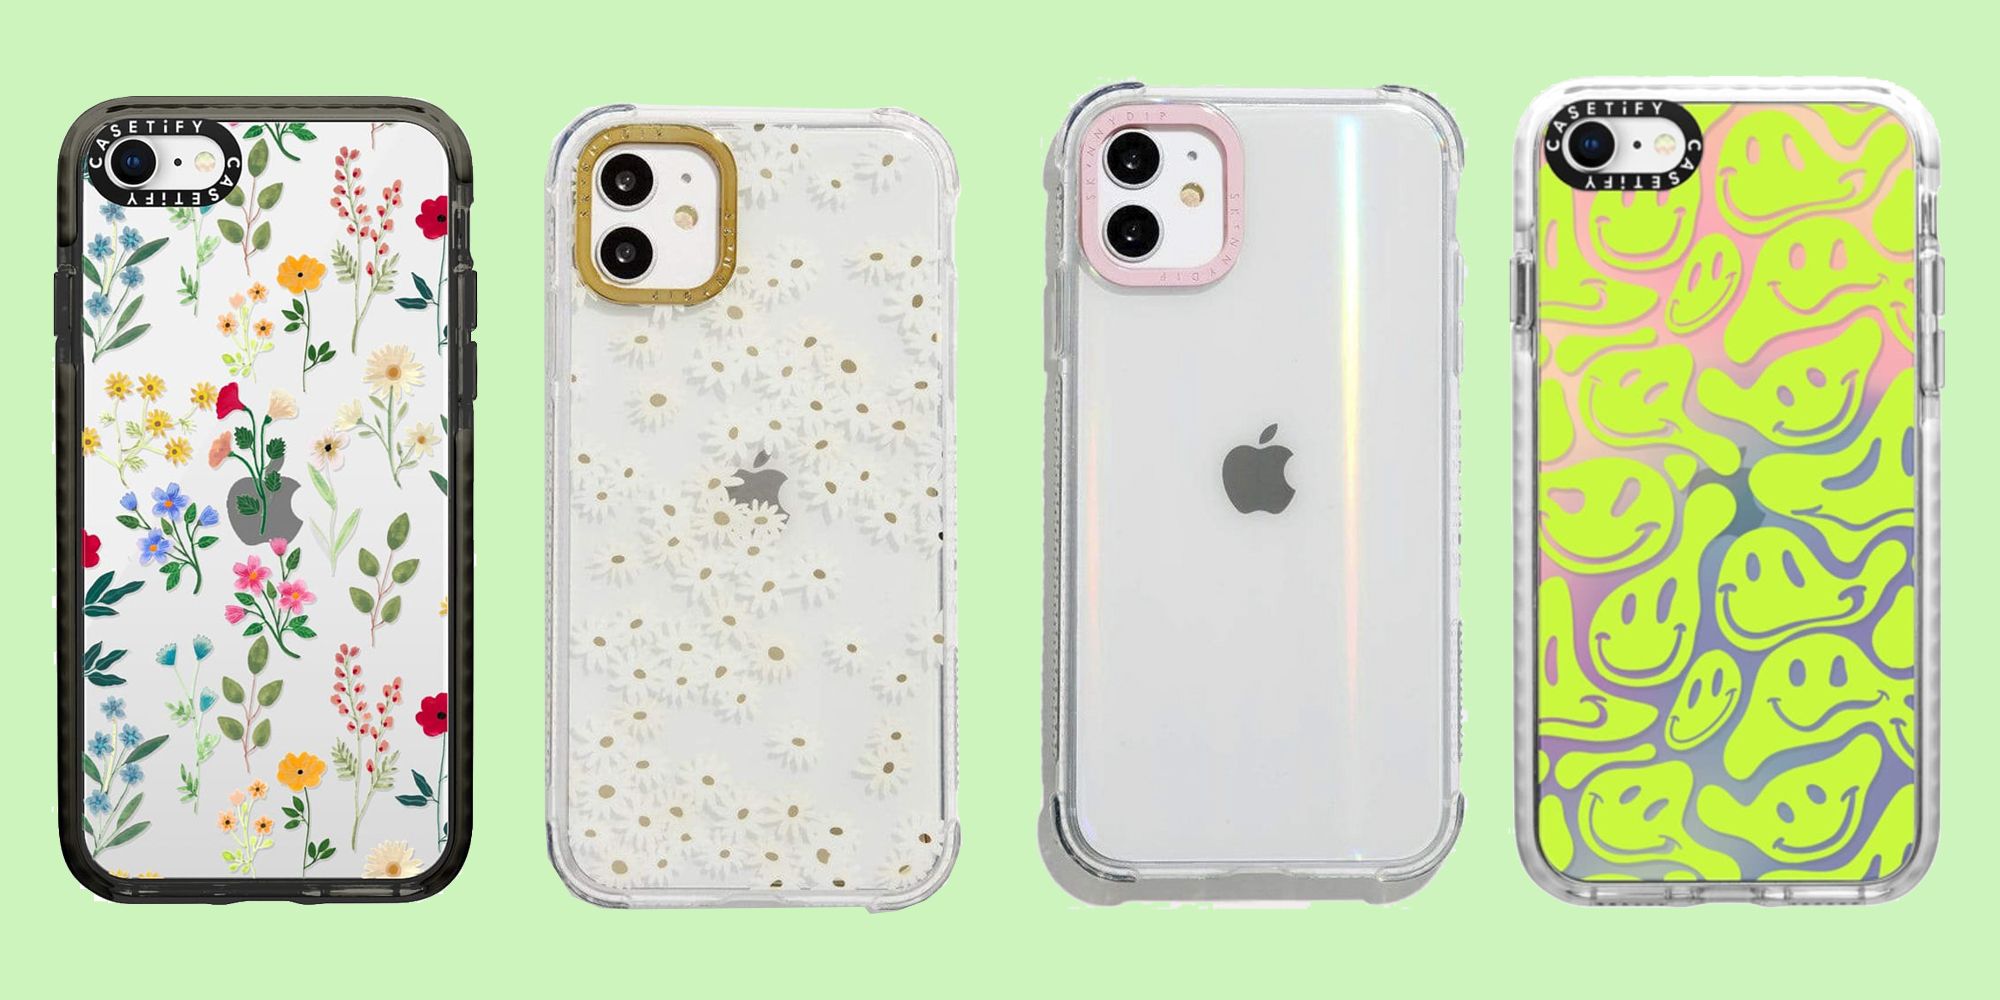 Best Phone Cases for the AT&T Calypso: 9 Must-Have Accessories to Protect Your Device